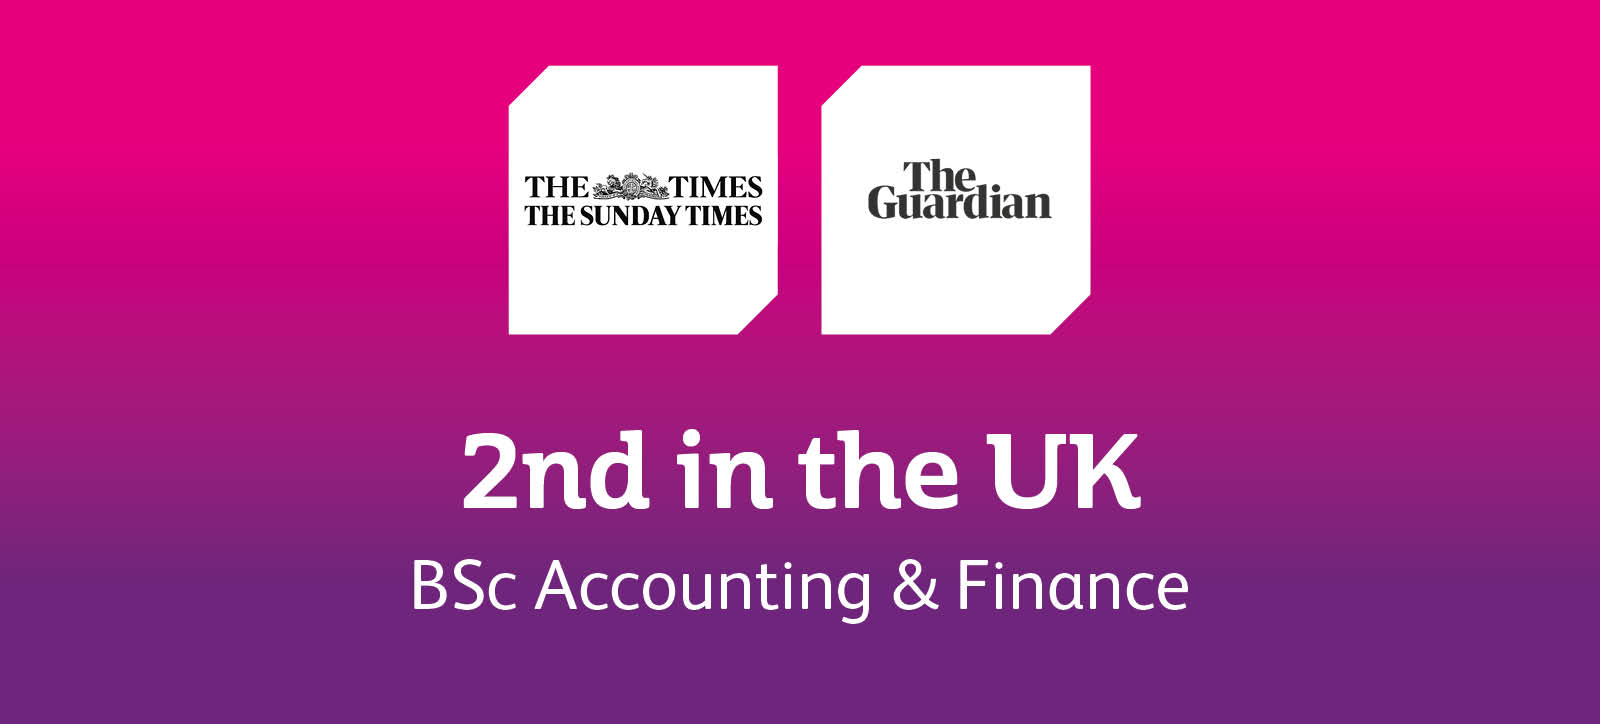 WBS is second in the UK for accounting and finance